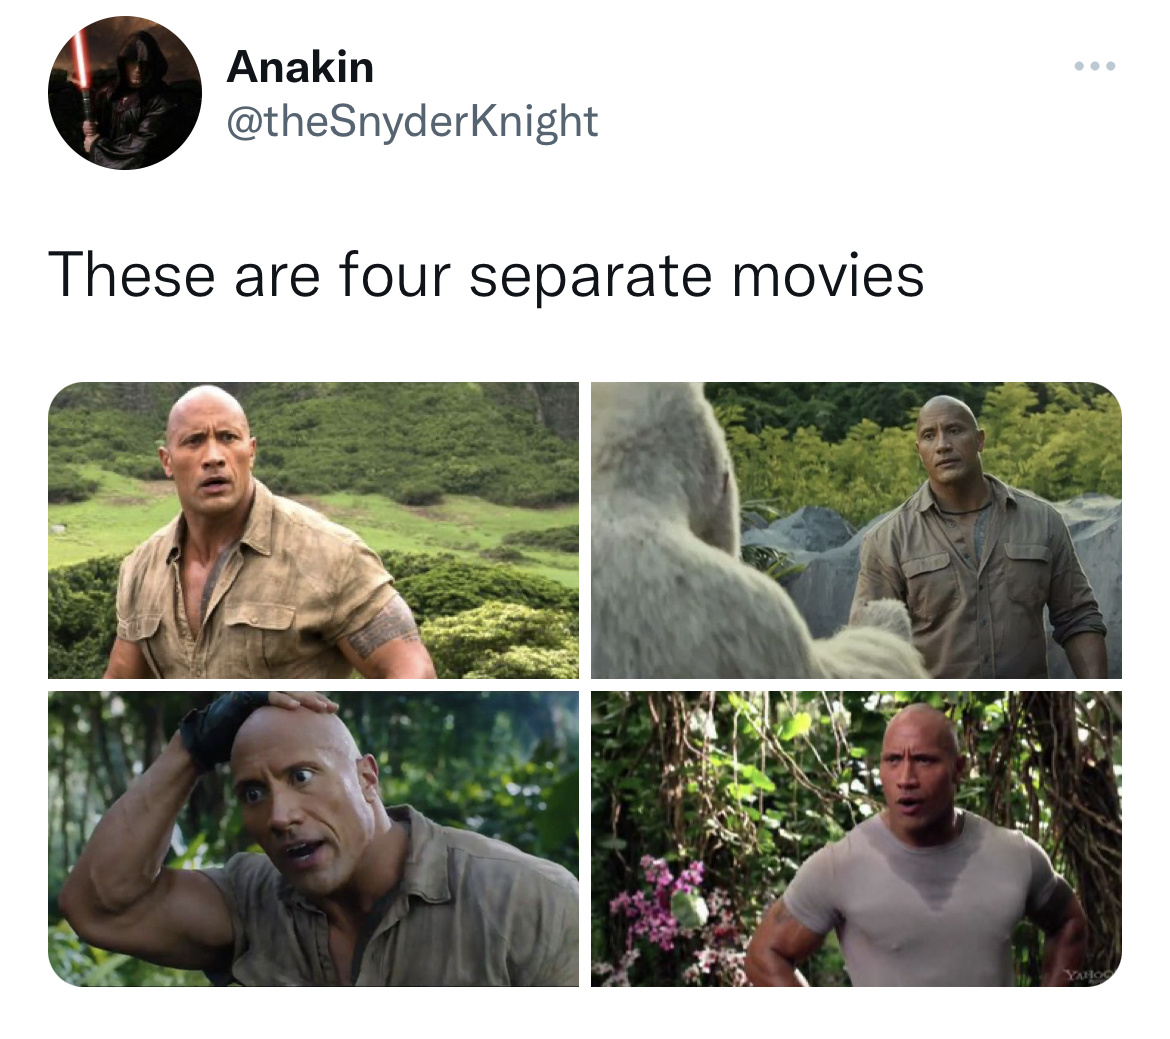 funny quick wit tweets - grass - Anakin These are four separate movies